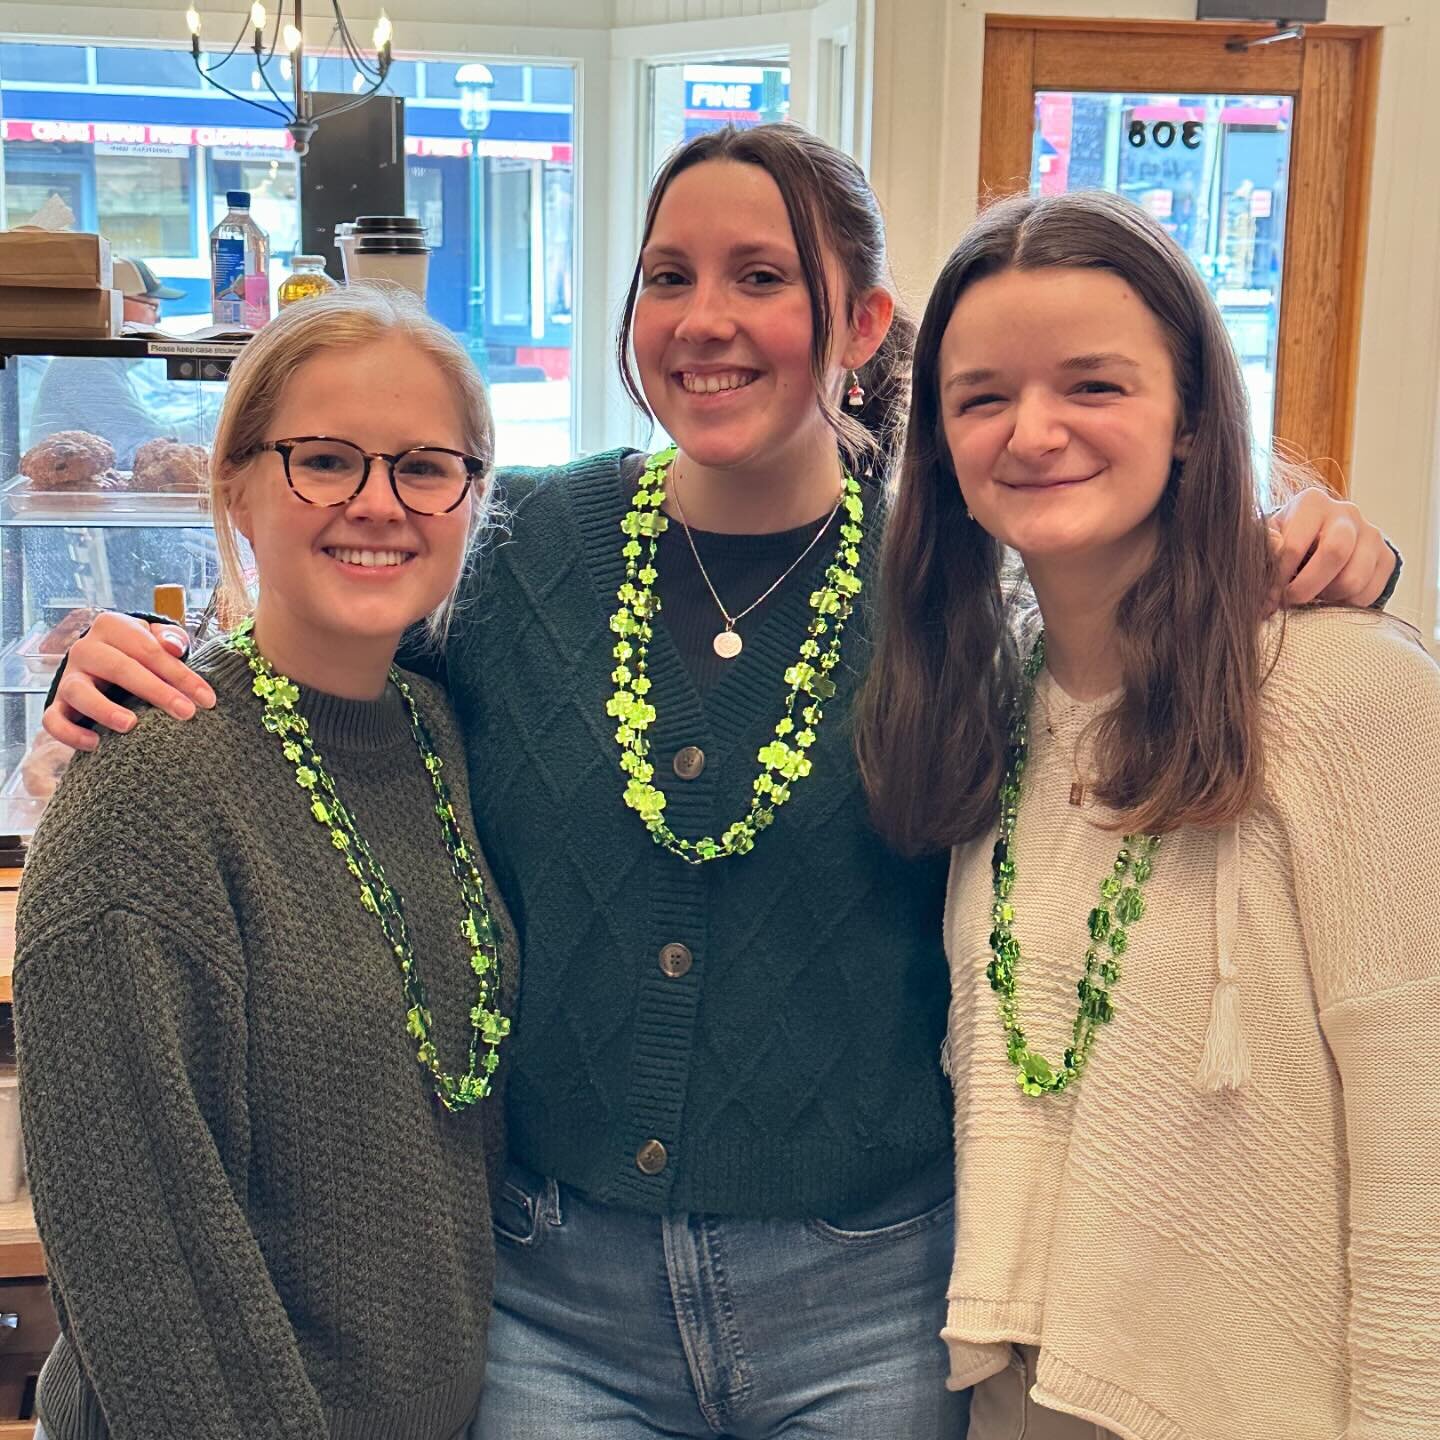 May the Luck of the Irish be with you today and every day! And, we are lucky to have such a great Crew today and every day. Happy Sunday and Happy St. Patrick&rsquo;s Day ☘️💚☘️

@downtownpetoskey @northperkcoffee #northperkcoffee #stpatricksday #cof